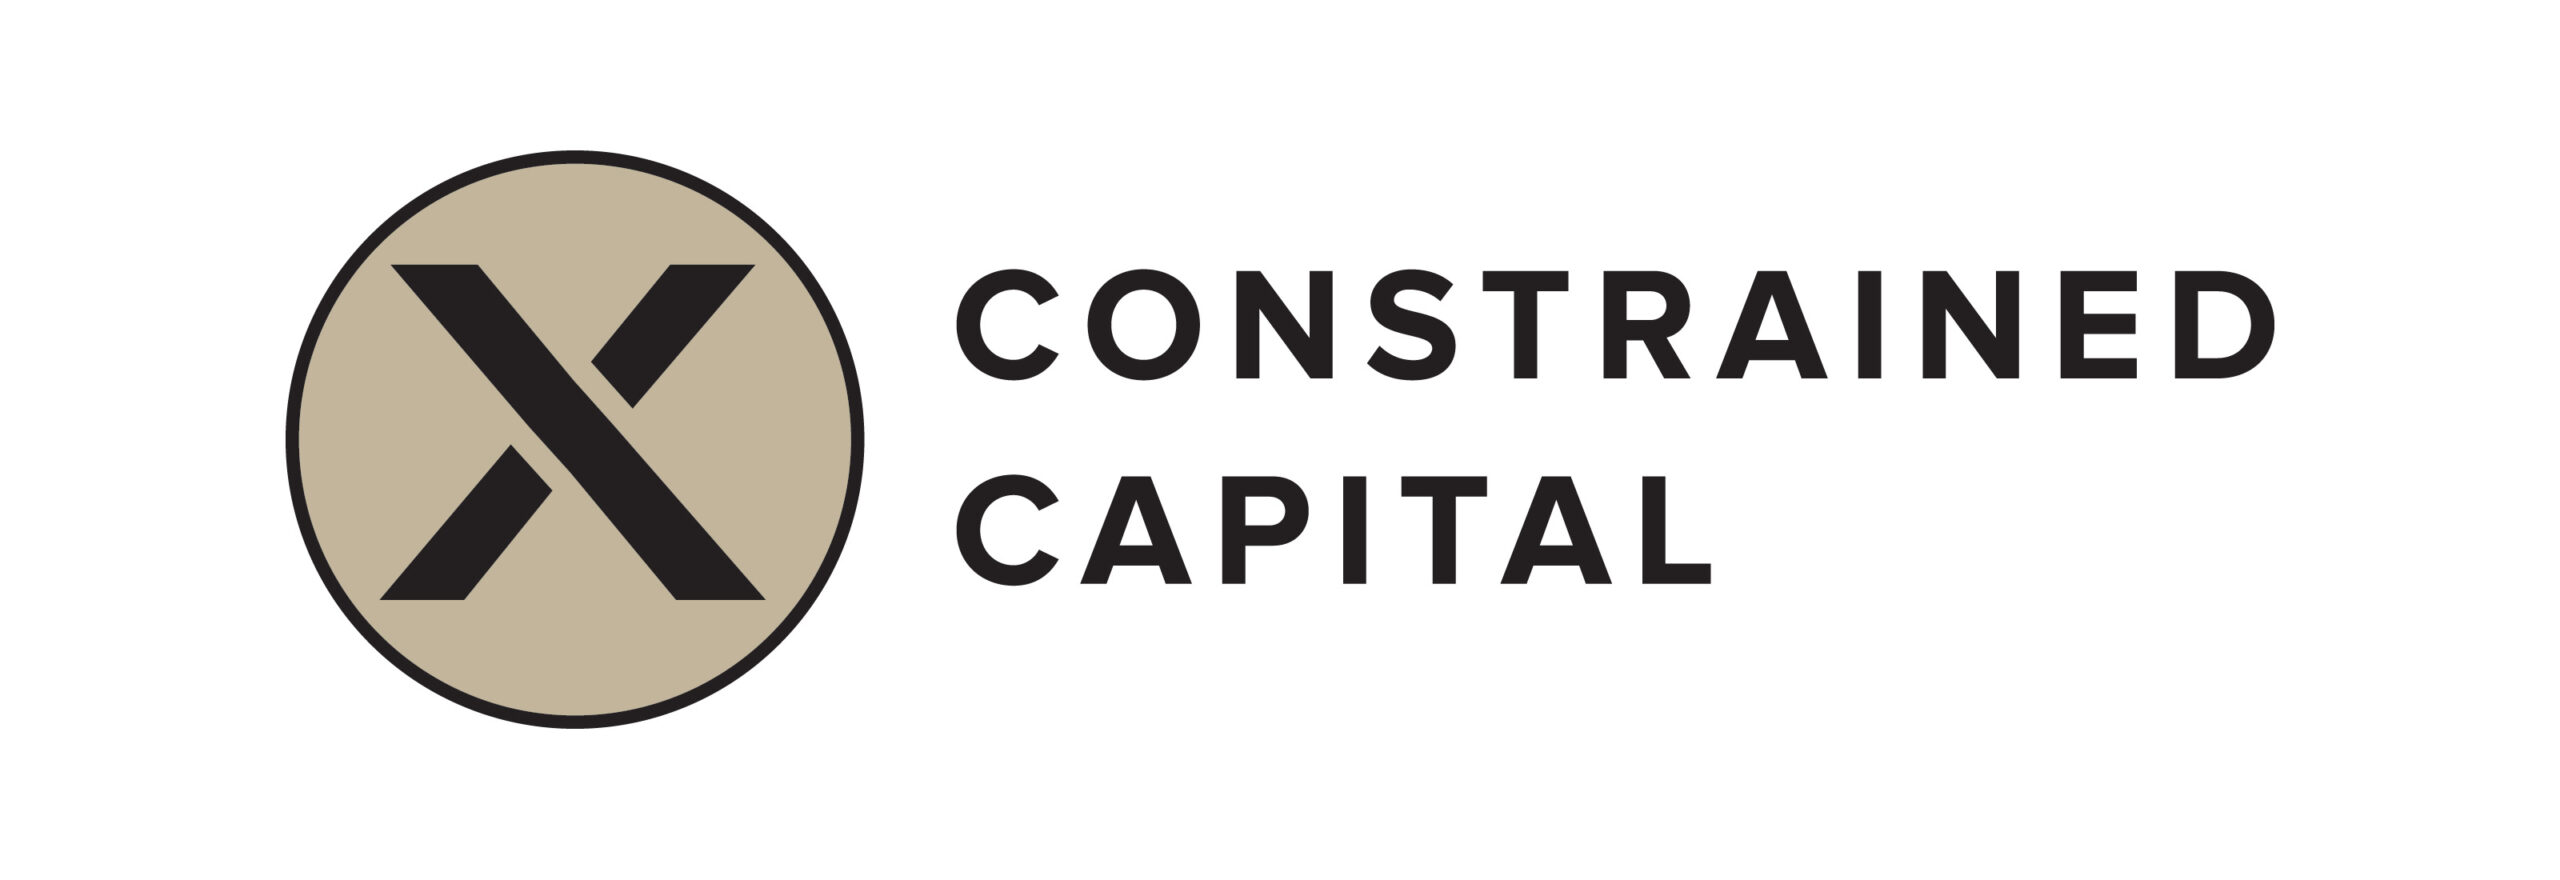 Constrained Capital